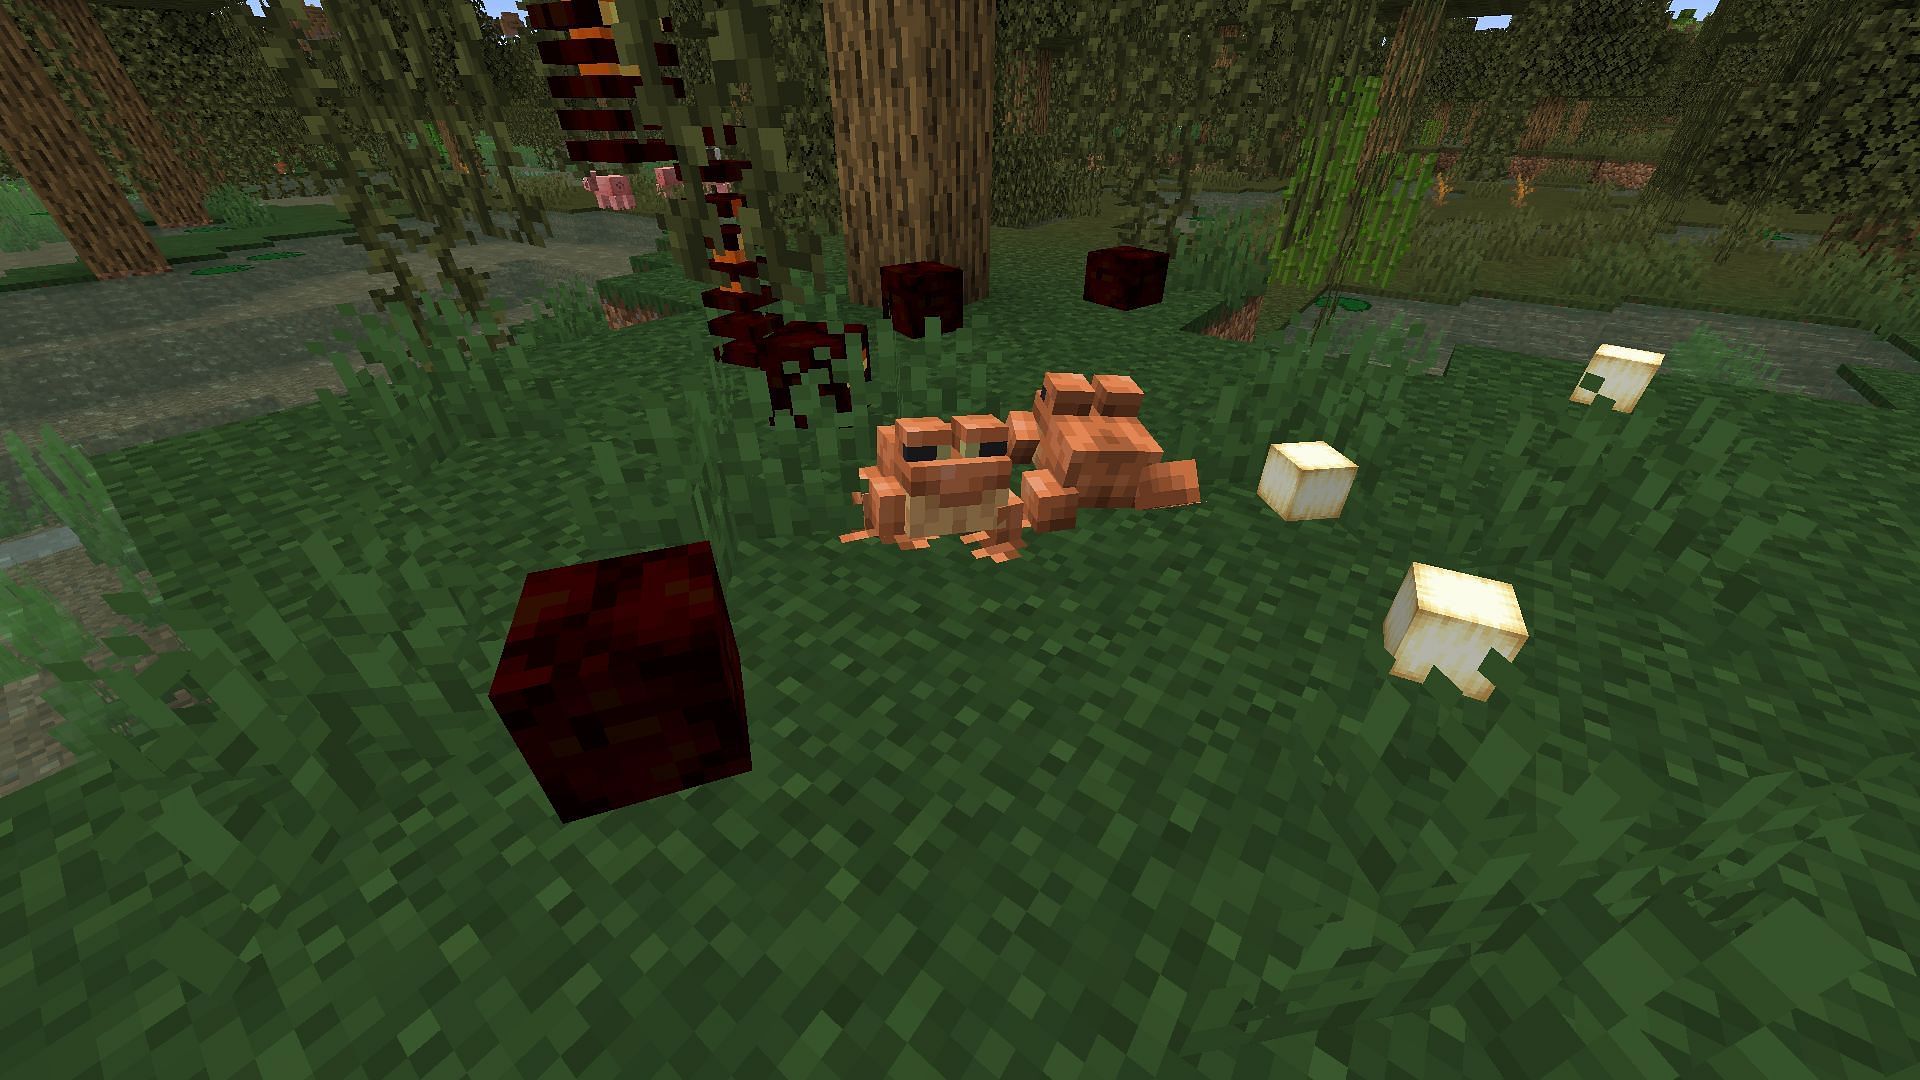 Orange frogs dropping Ochre froglight that is orange in color (Image via Mojang)